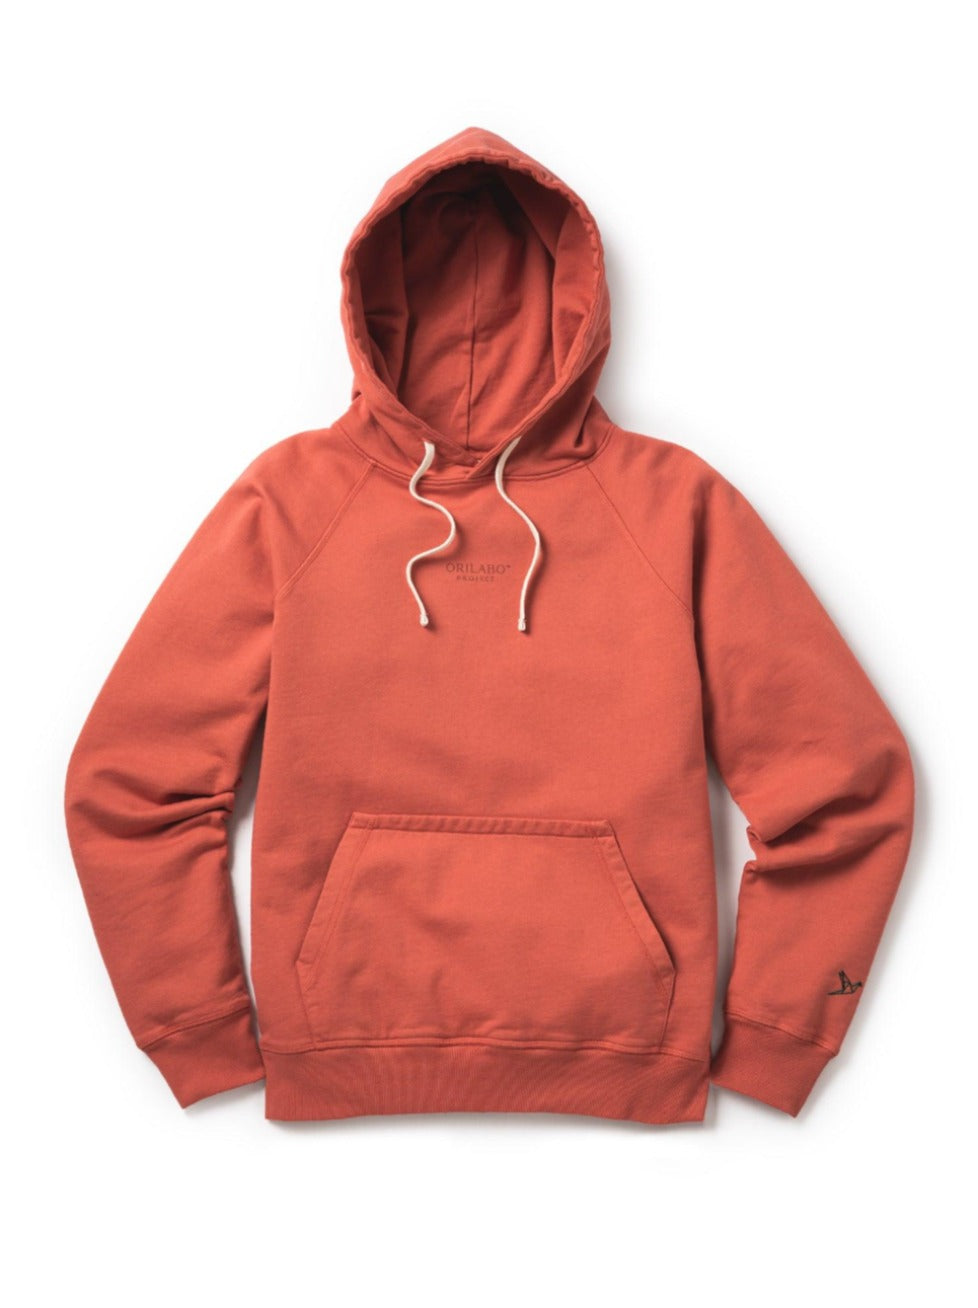 Men's Terry Hoodie - Coral - ORILABO Project